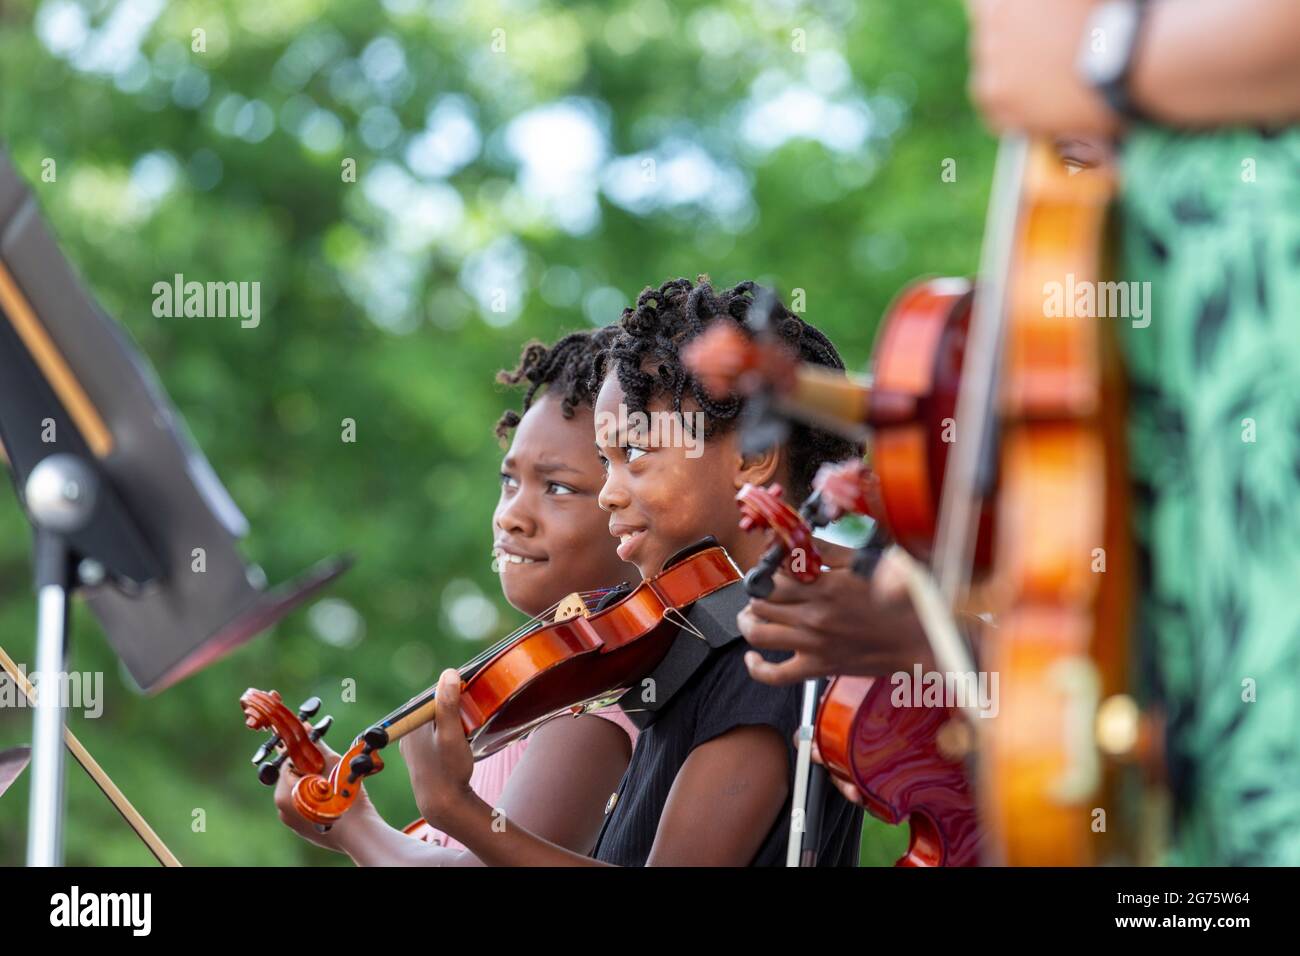 Detroit, Michigan - Students at Duke Ellington elementary school, part of the Detroit Public School system, play violin at a community arts and music Stock Photo